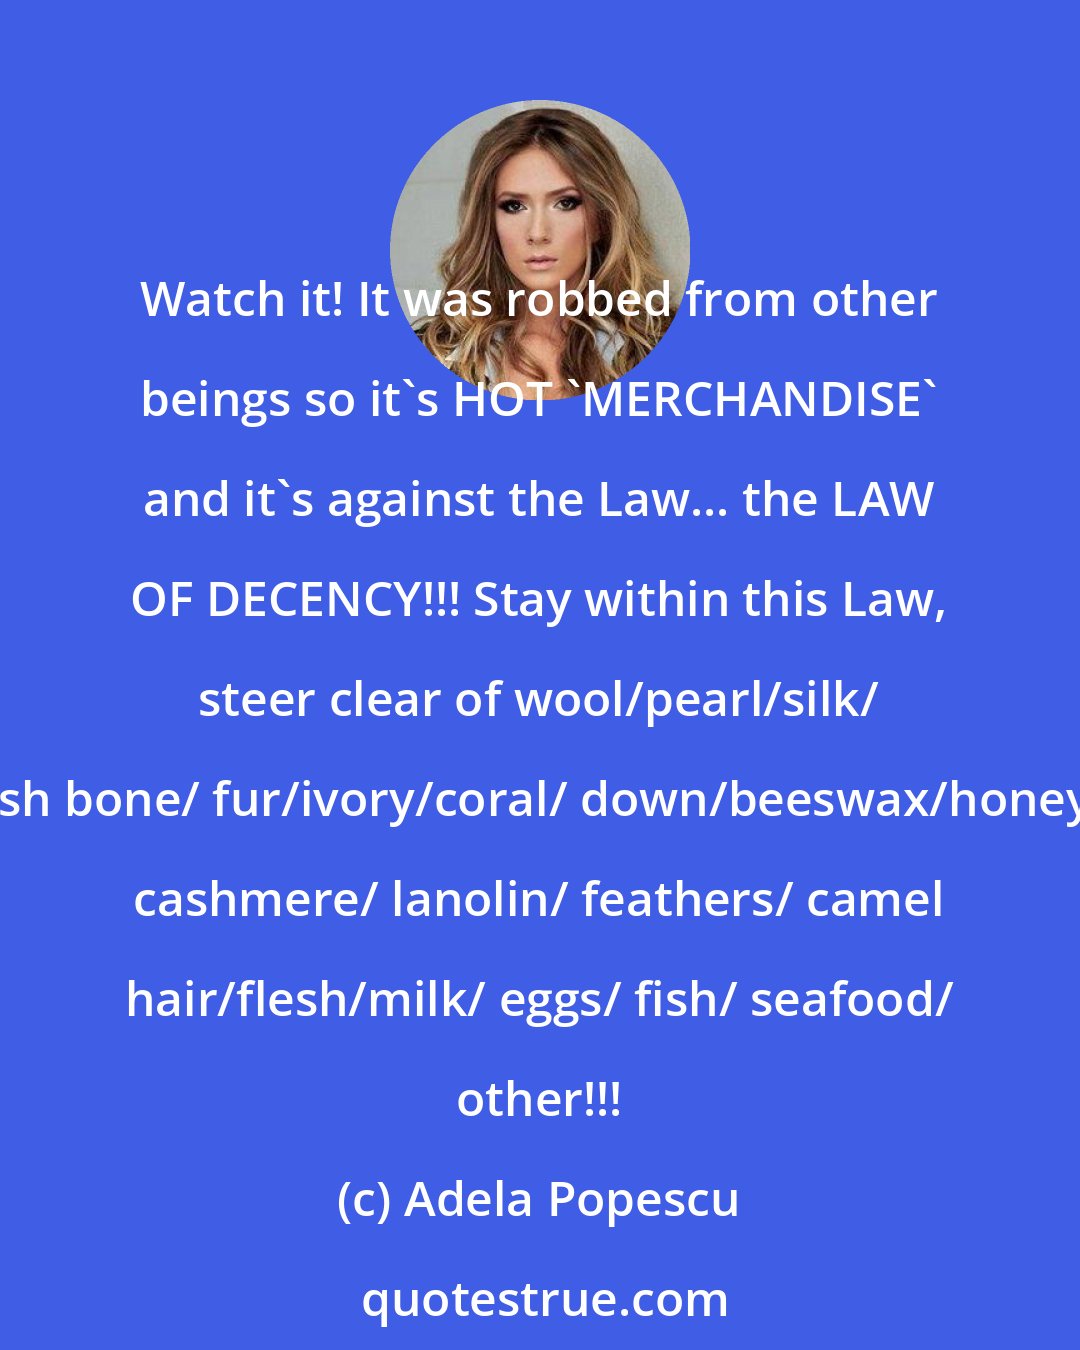 Adela Popescu: Watch it! It was robbed from other beings so it's HOT 'MERCHANDISE' and it's against the Law... the LAW OF DECENCY!!! Stay within this Law, steer clear of wool/pearl/silk/ fish bone/ fur/ivory/coral/ down/beeswax/honey/ cashmere/ lanolin/ feathers/ camel hair/flesh/milk/ eggs/ fish/ seafood/ other!!!